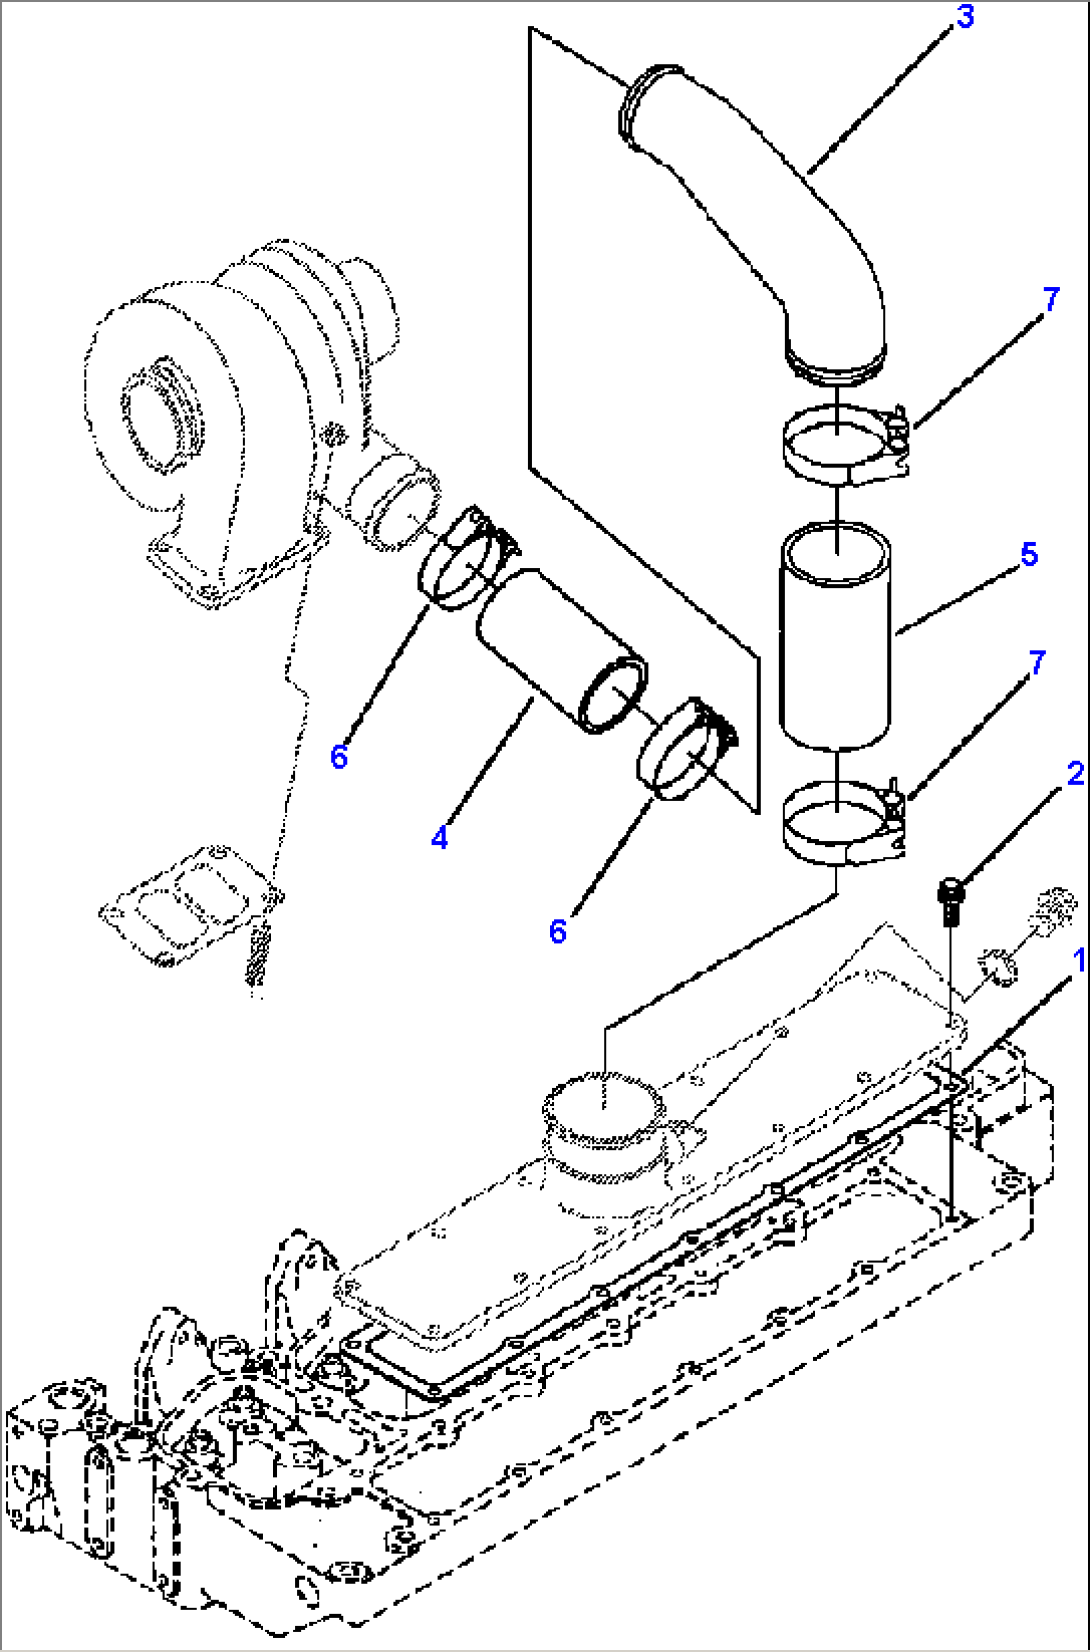 INTAKE MANIFOLD CONNECTIONS